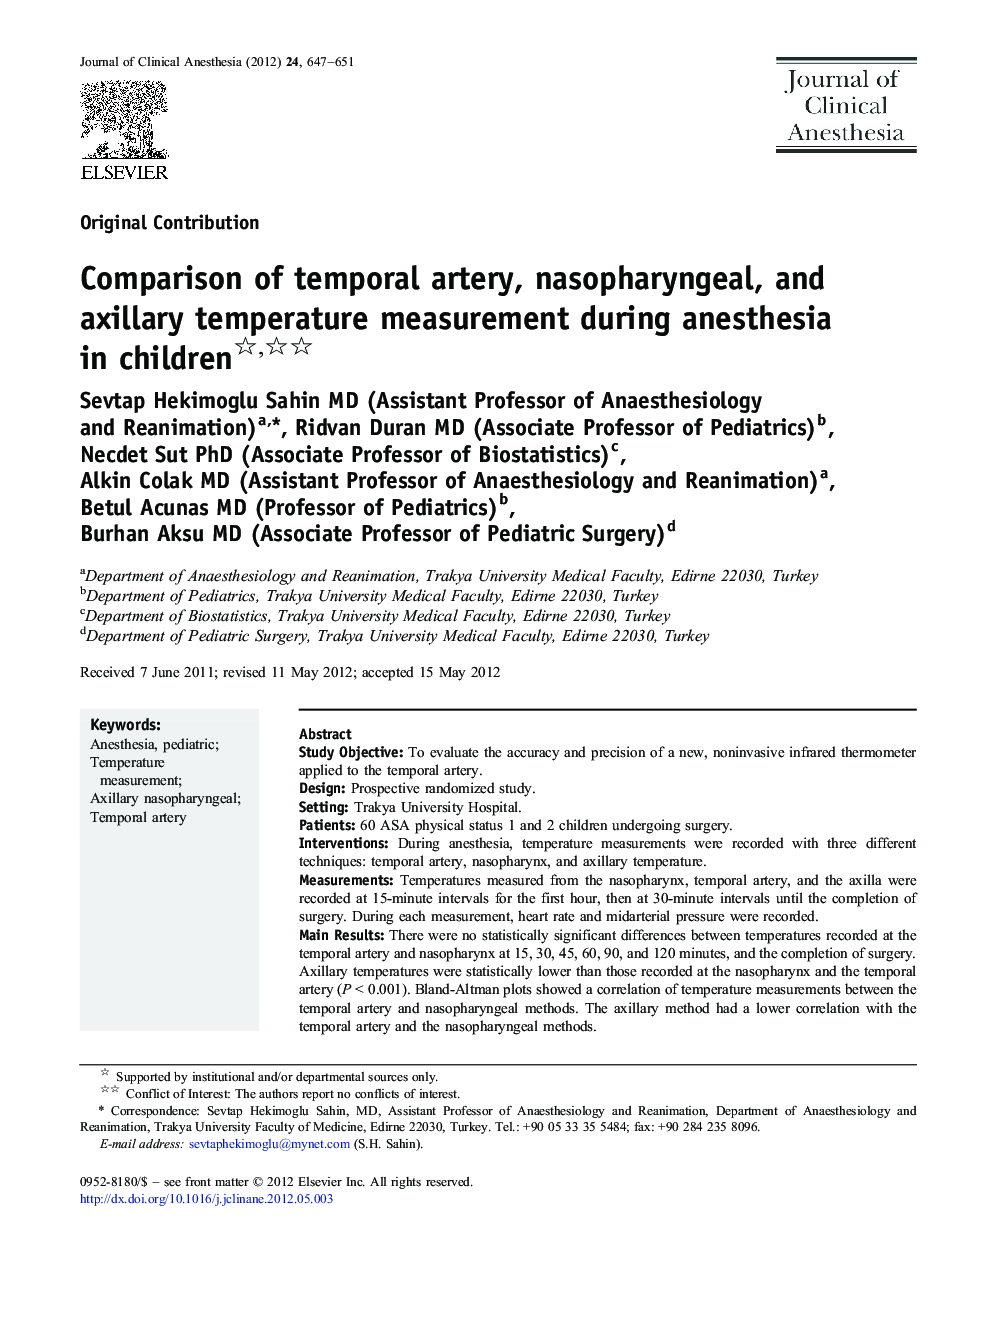 Comparison of temporal artery, nasopharyngeal, and axillary temperature measurement during anesthesia in children 